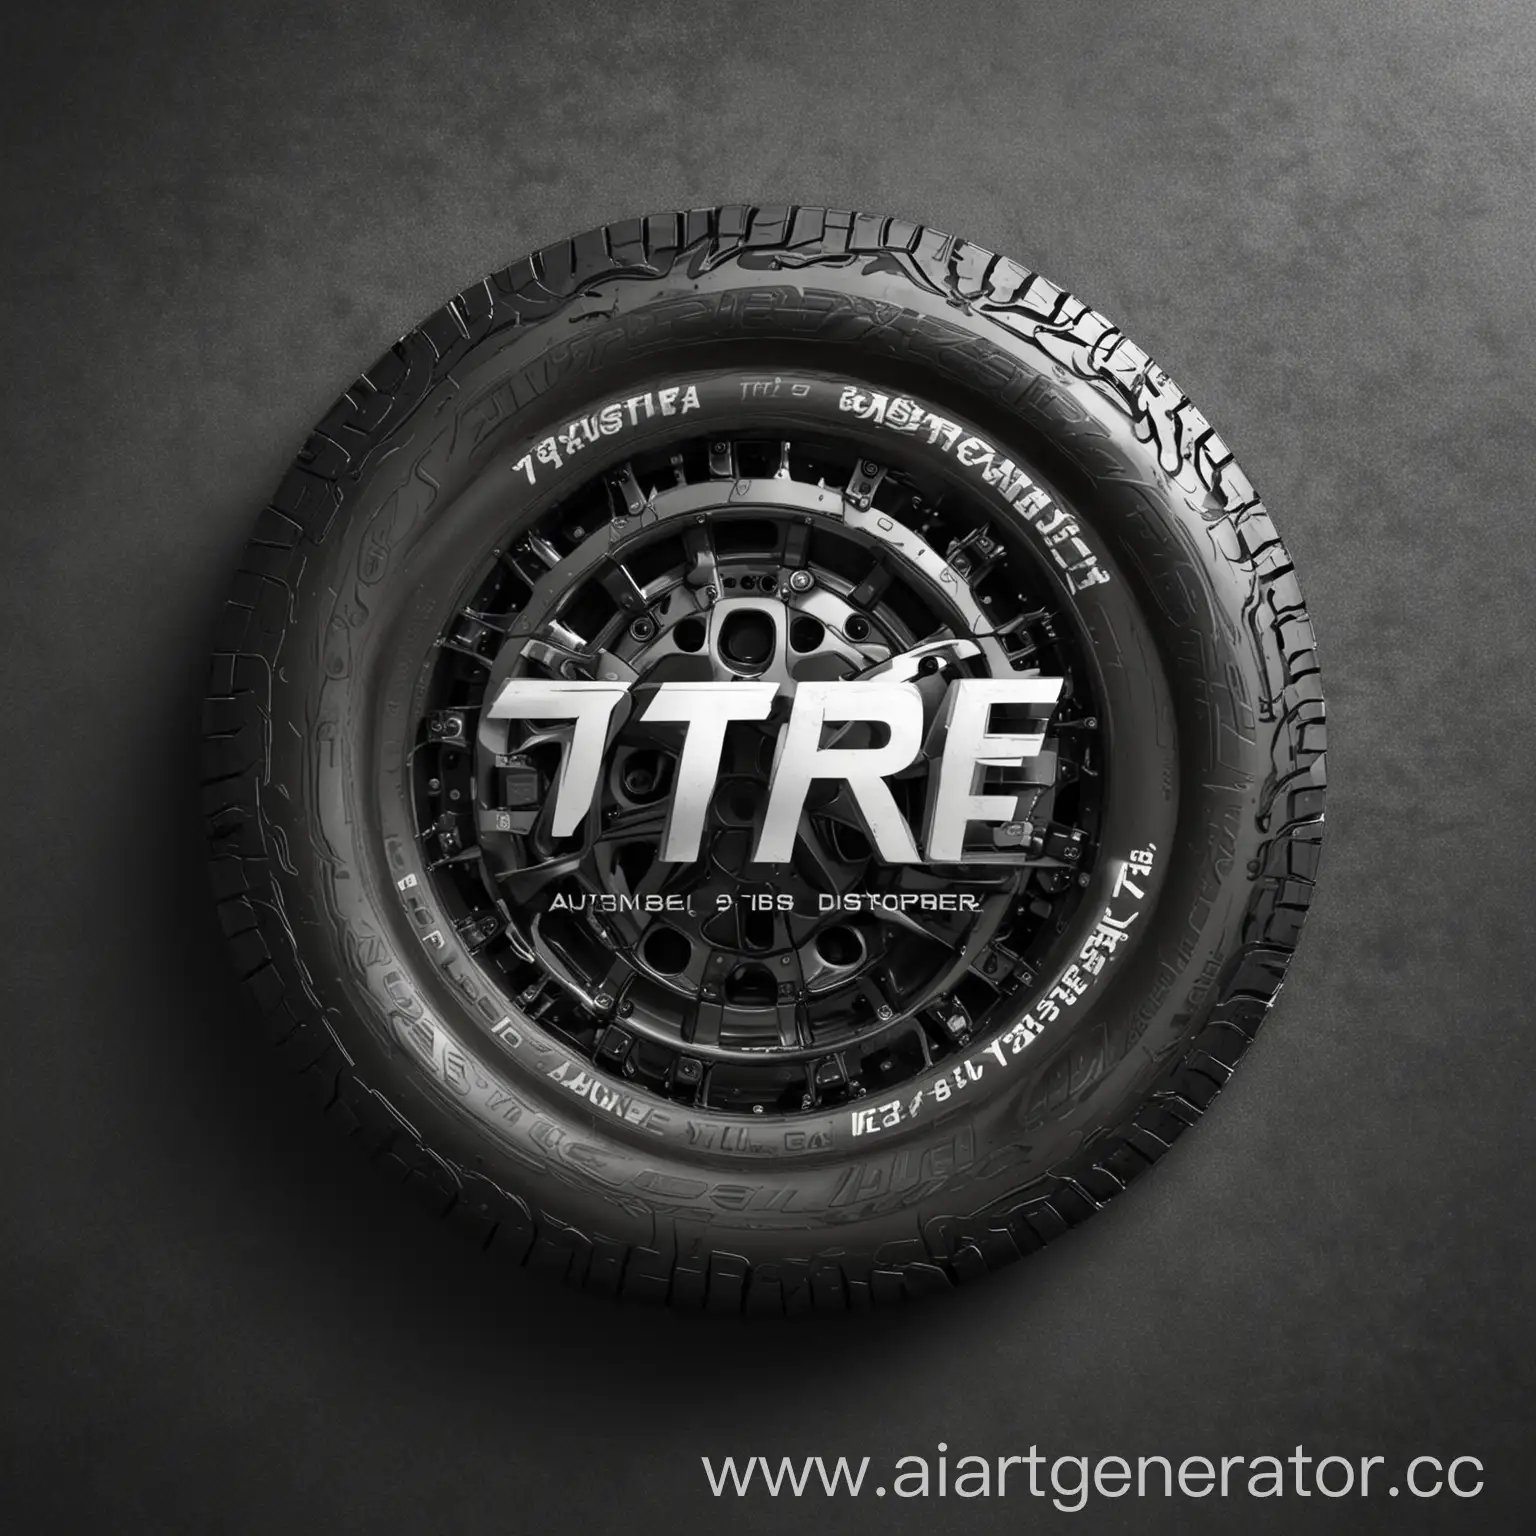 Automobile-Rubber-Store-Tire-Logotype-with-Tires-and-Disks